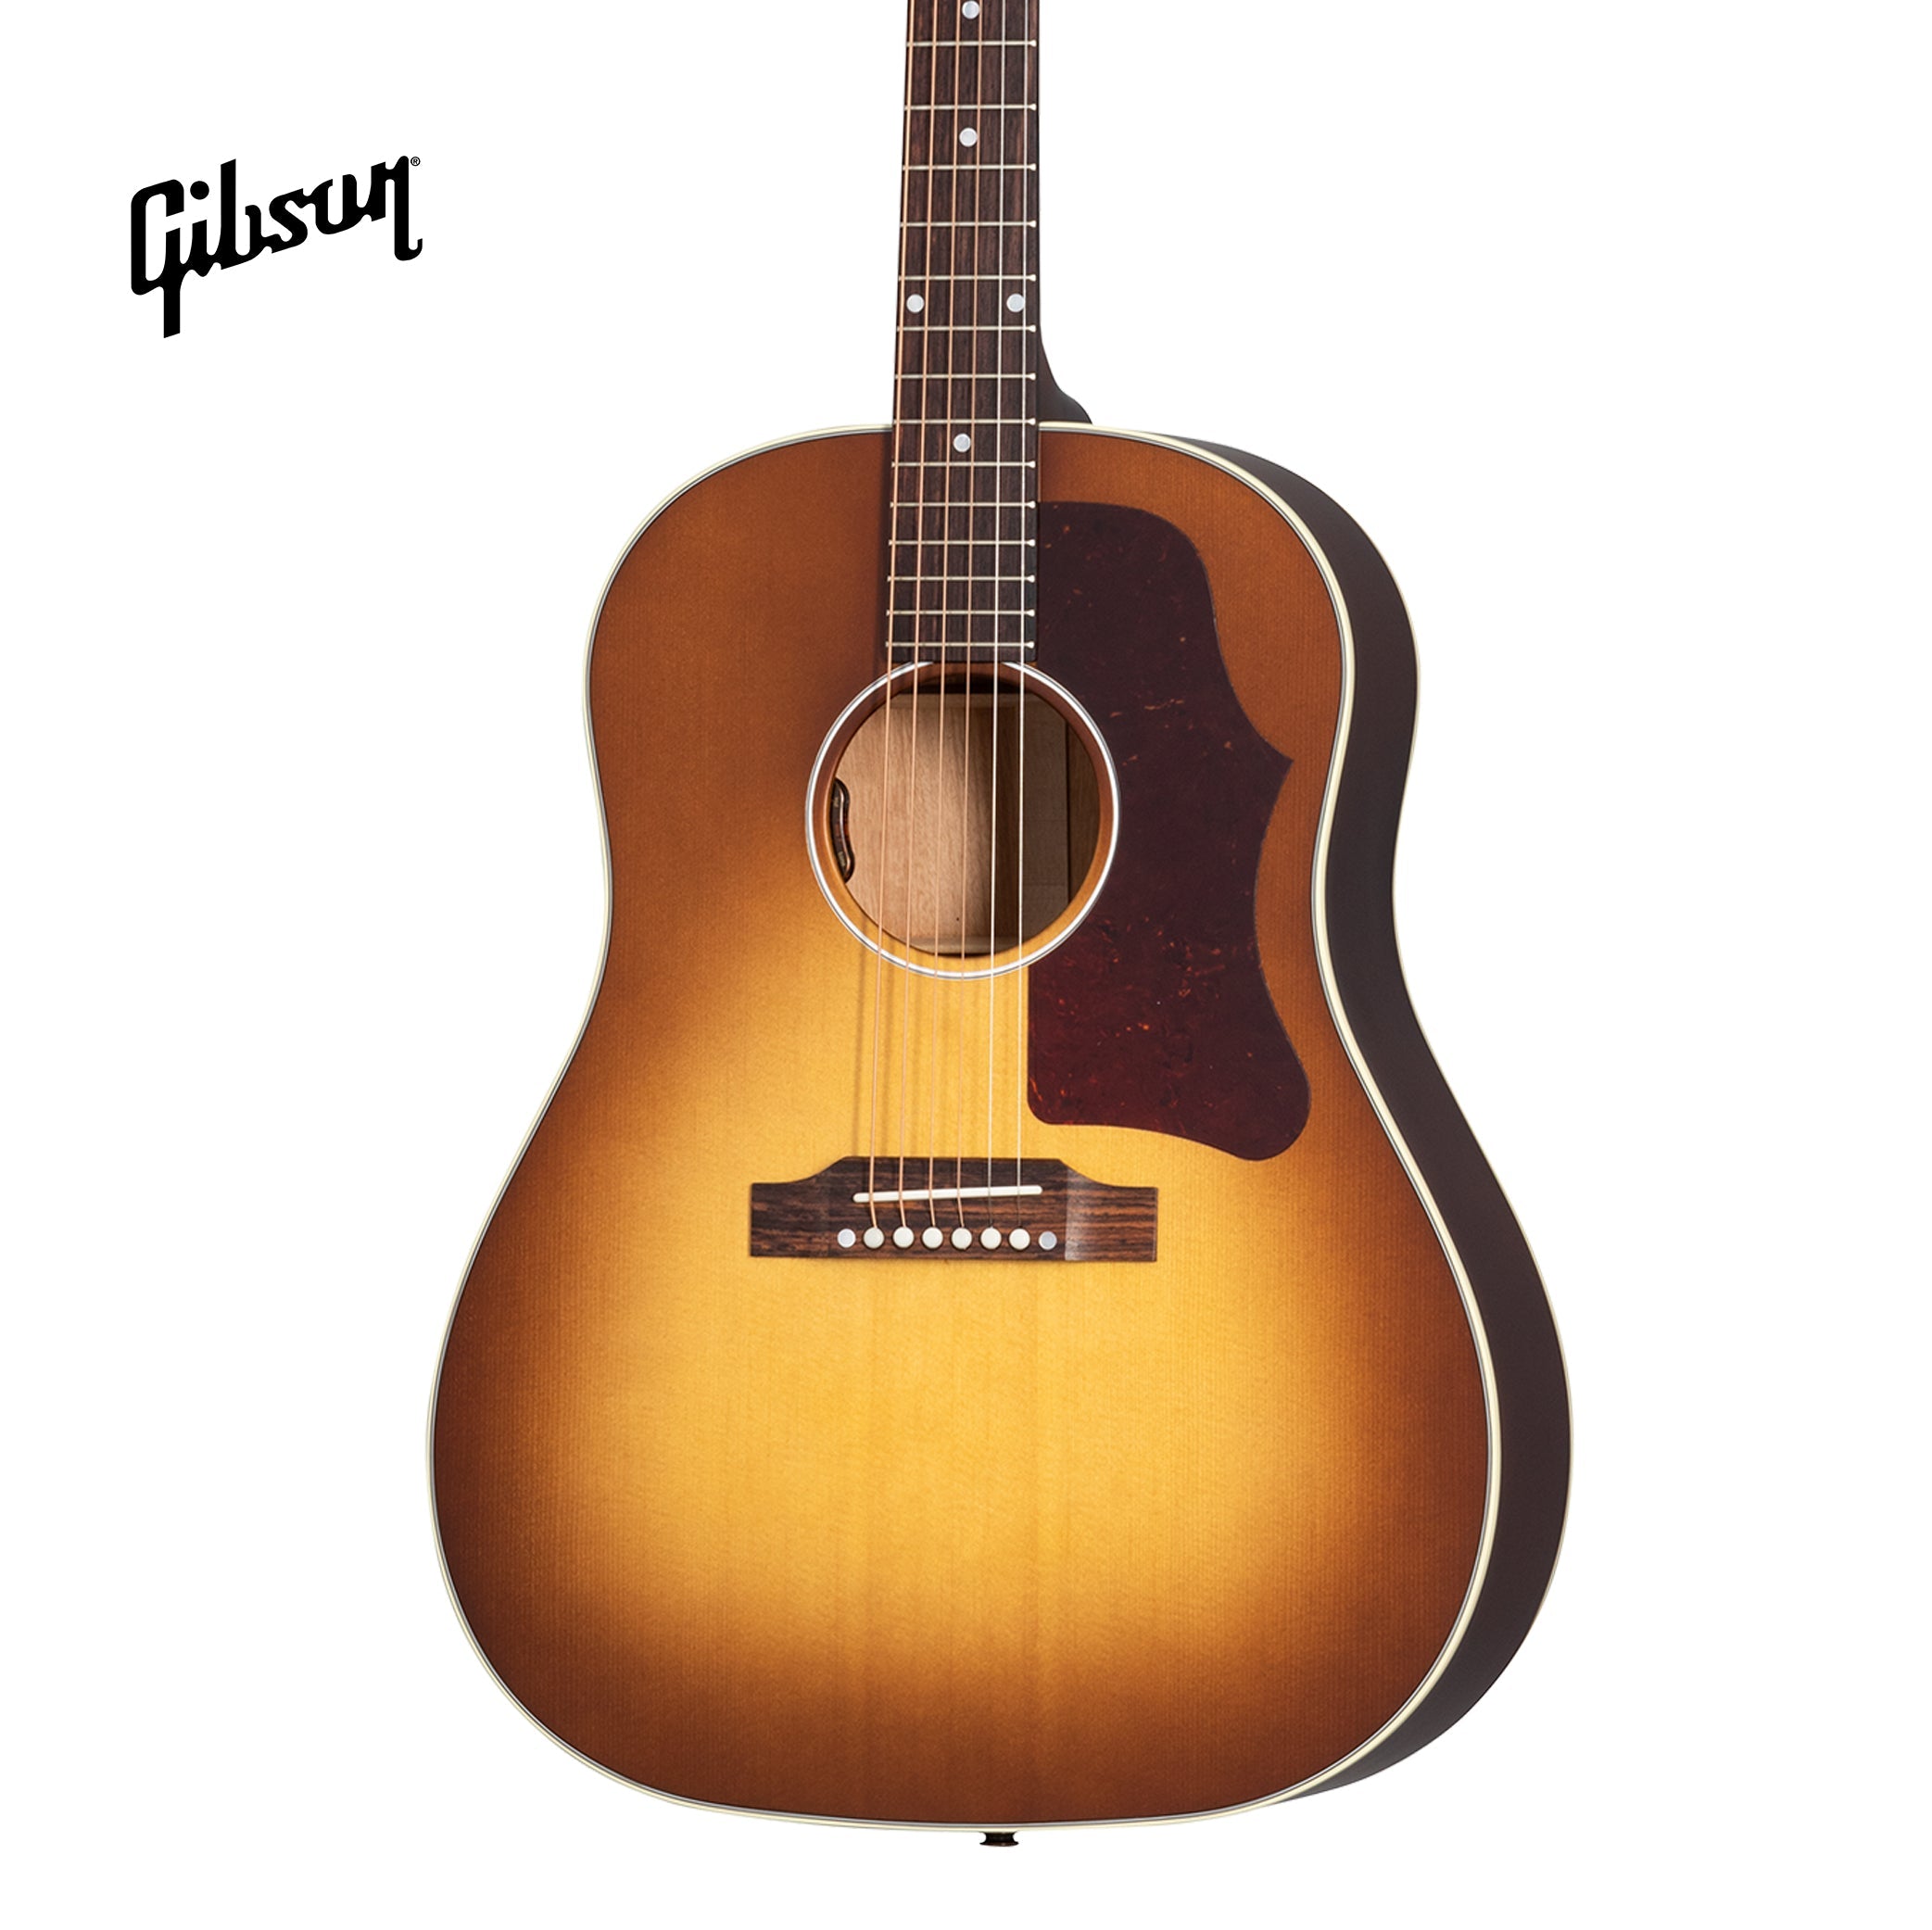 GIBSON J-45 FADED 50S ACOUSTIC-ELECTRIC GUITAR - FADED VINTAGE SUNBURST